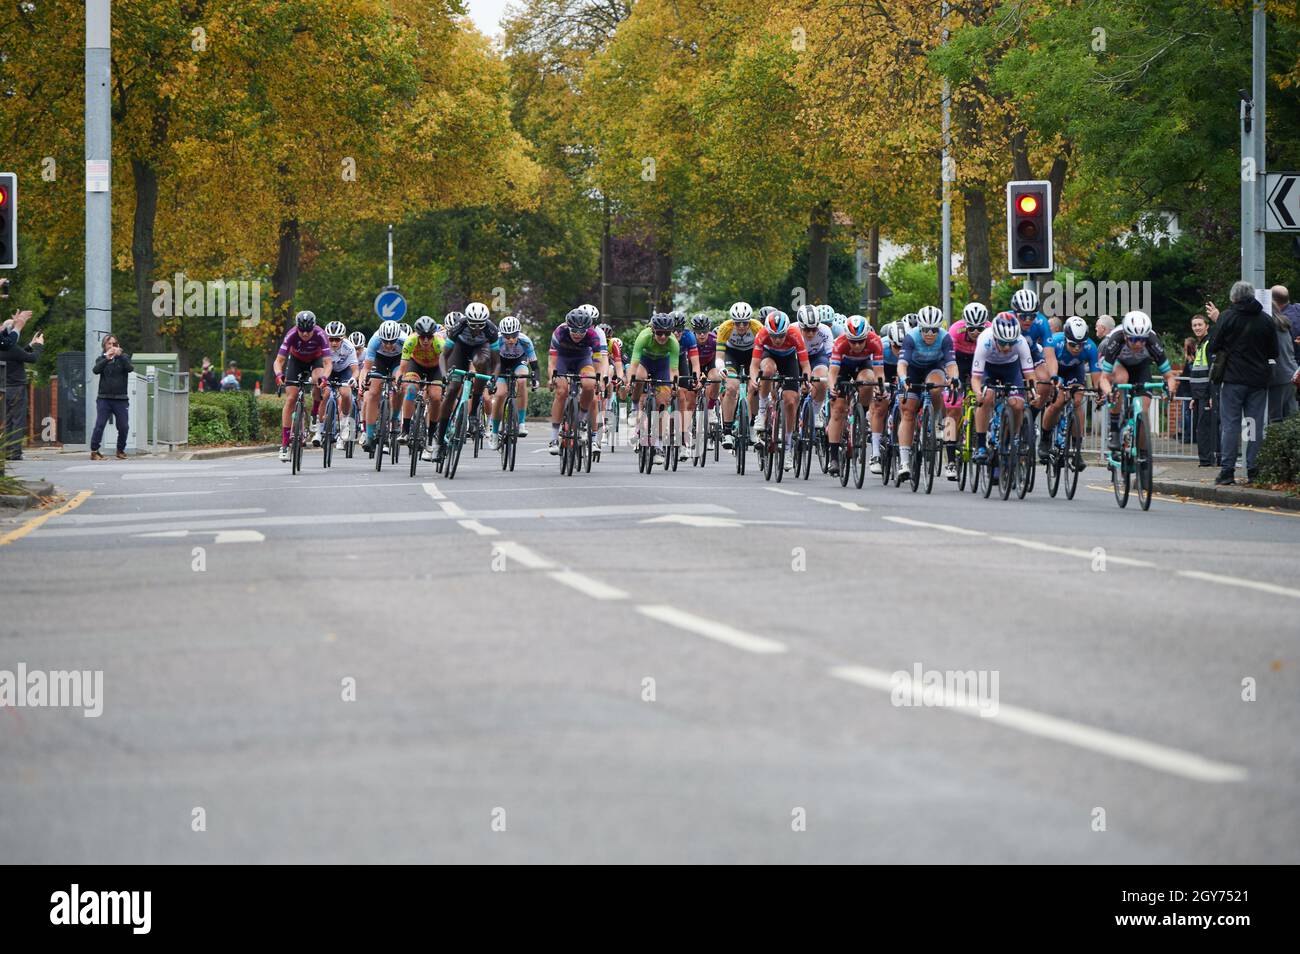 Southend-on-Sea, Essex, UK, 7th October 2021, Women’s Cycling Tour 2021 - stage 4, Chalkwell Avenue. Terry Mendoza Credit: Terence Mendoza/Alamy Live News Stock Photo